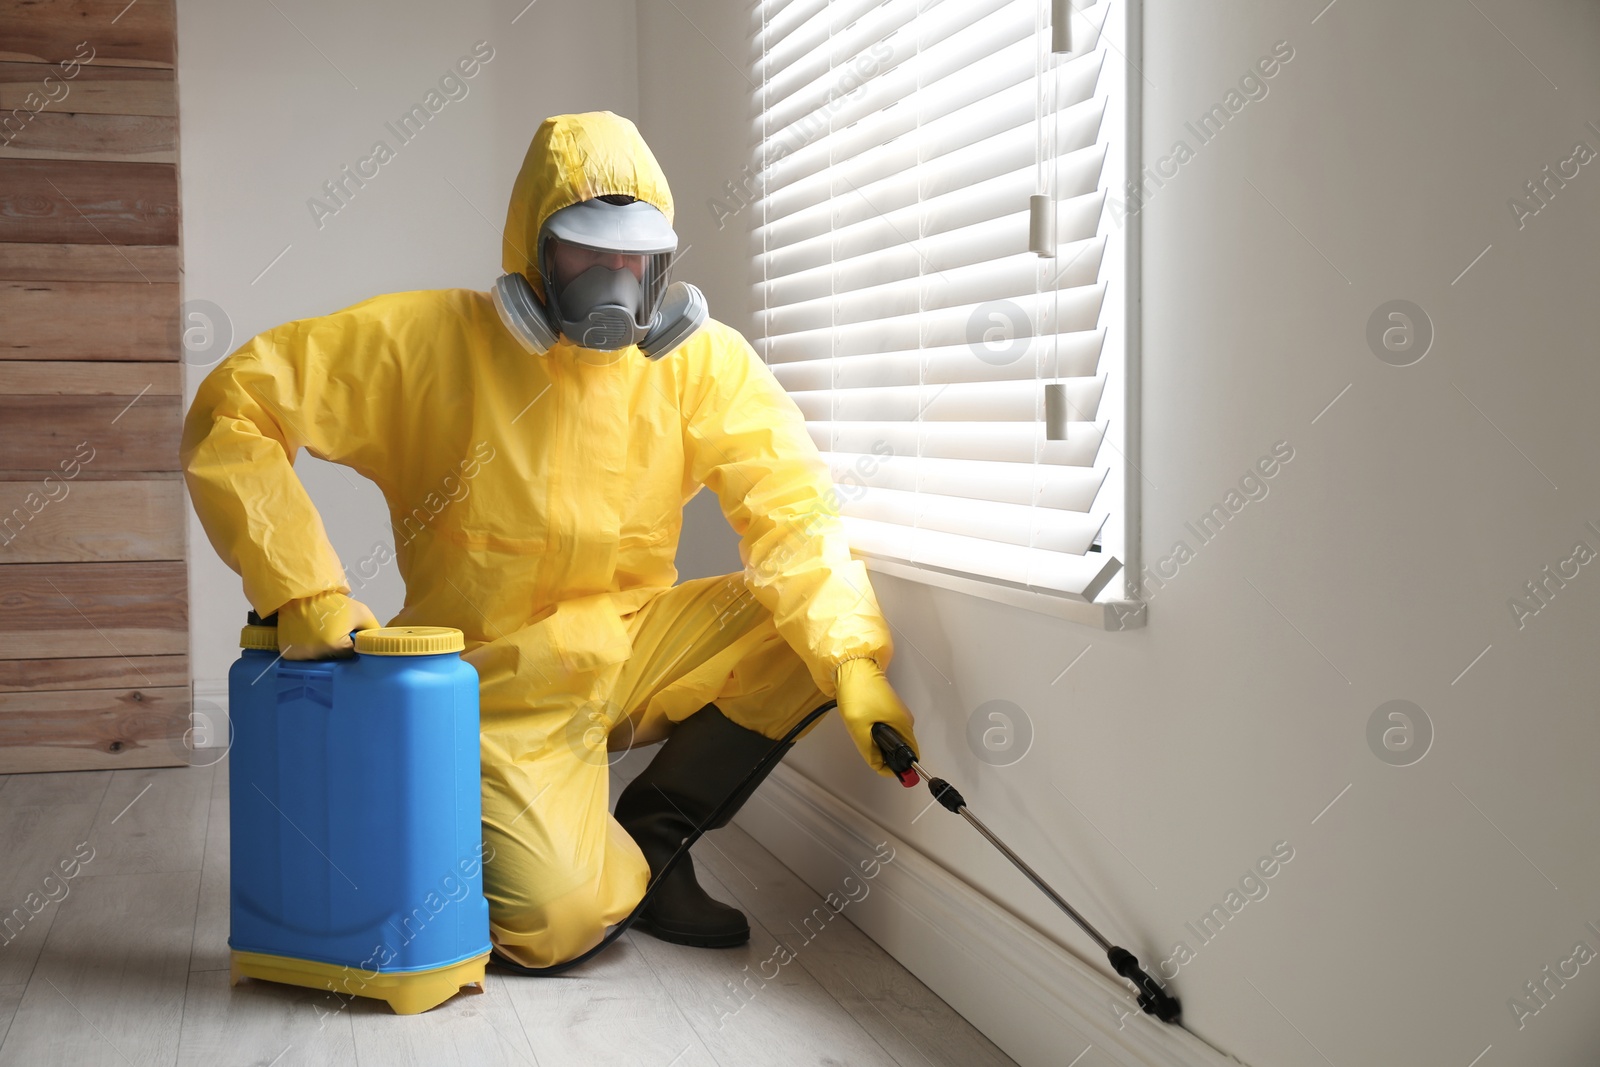 Photo of Pest control worker in protective suit spraying pesticide near window indoors